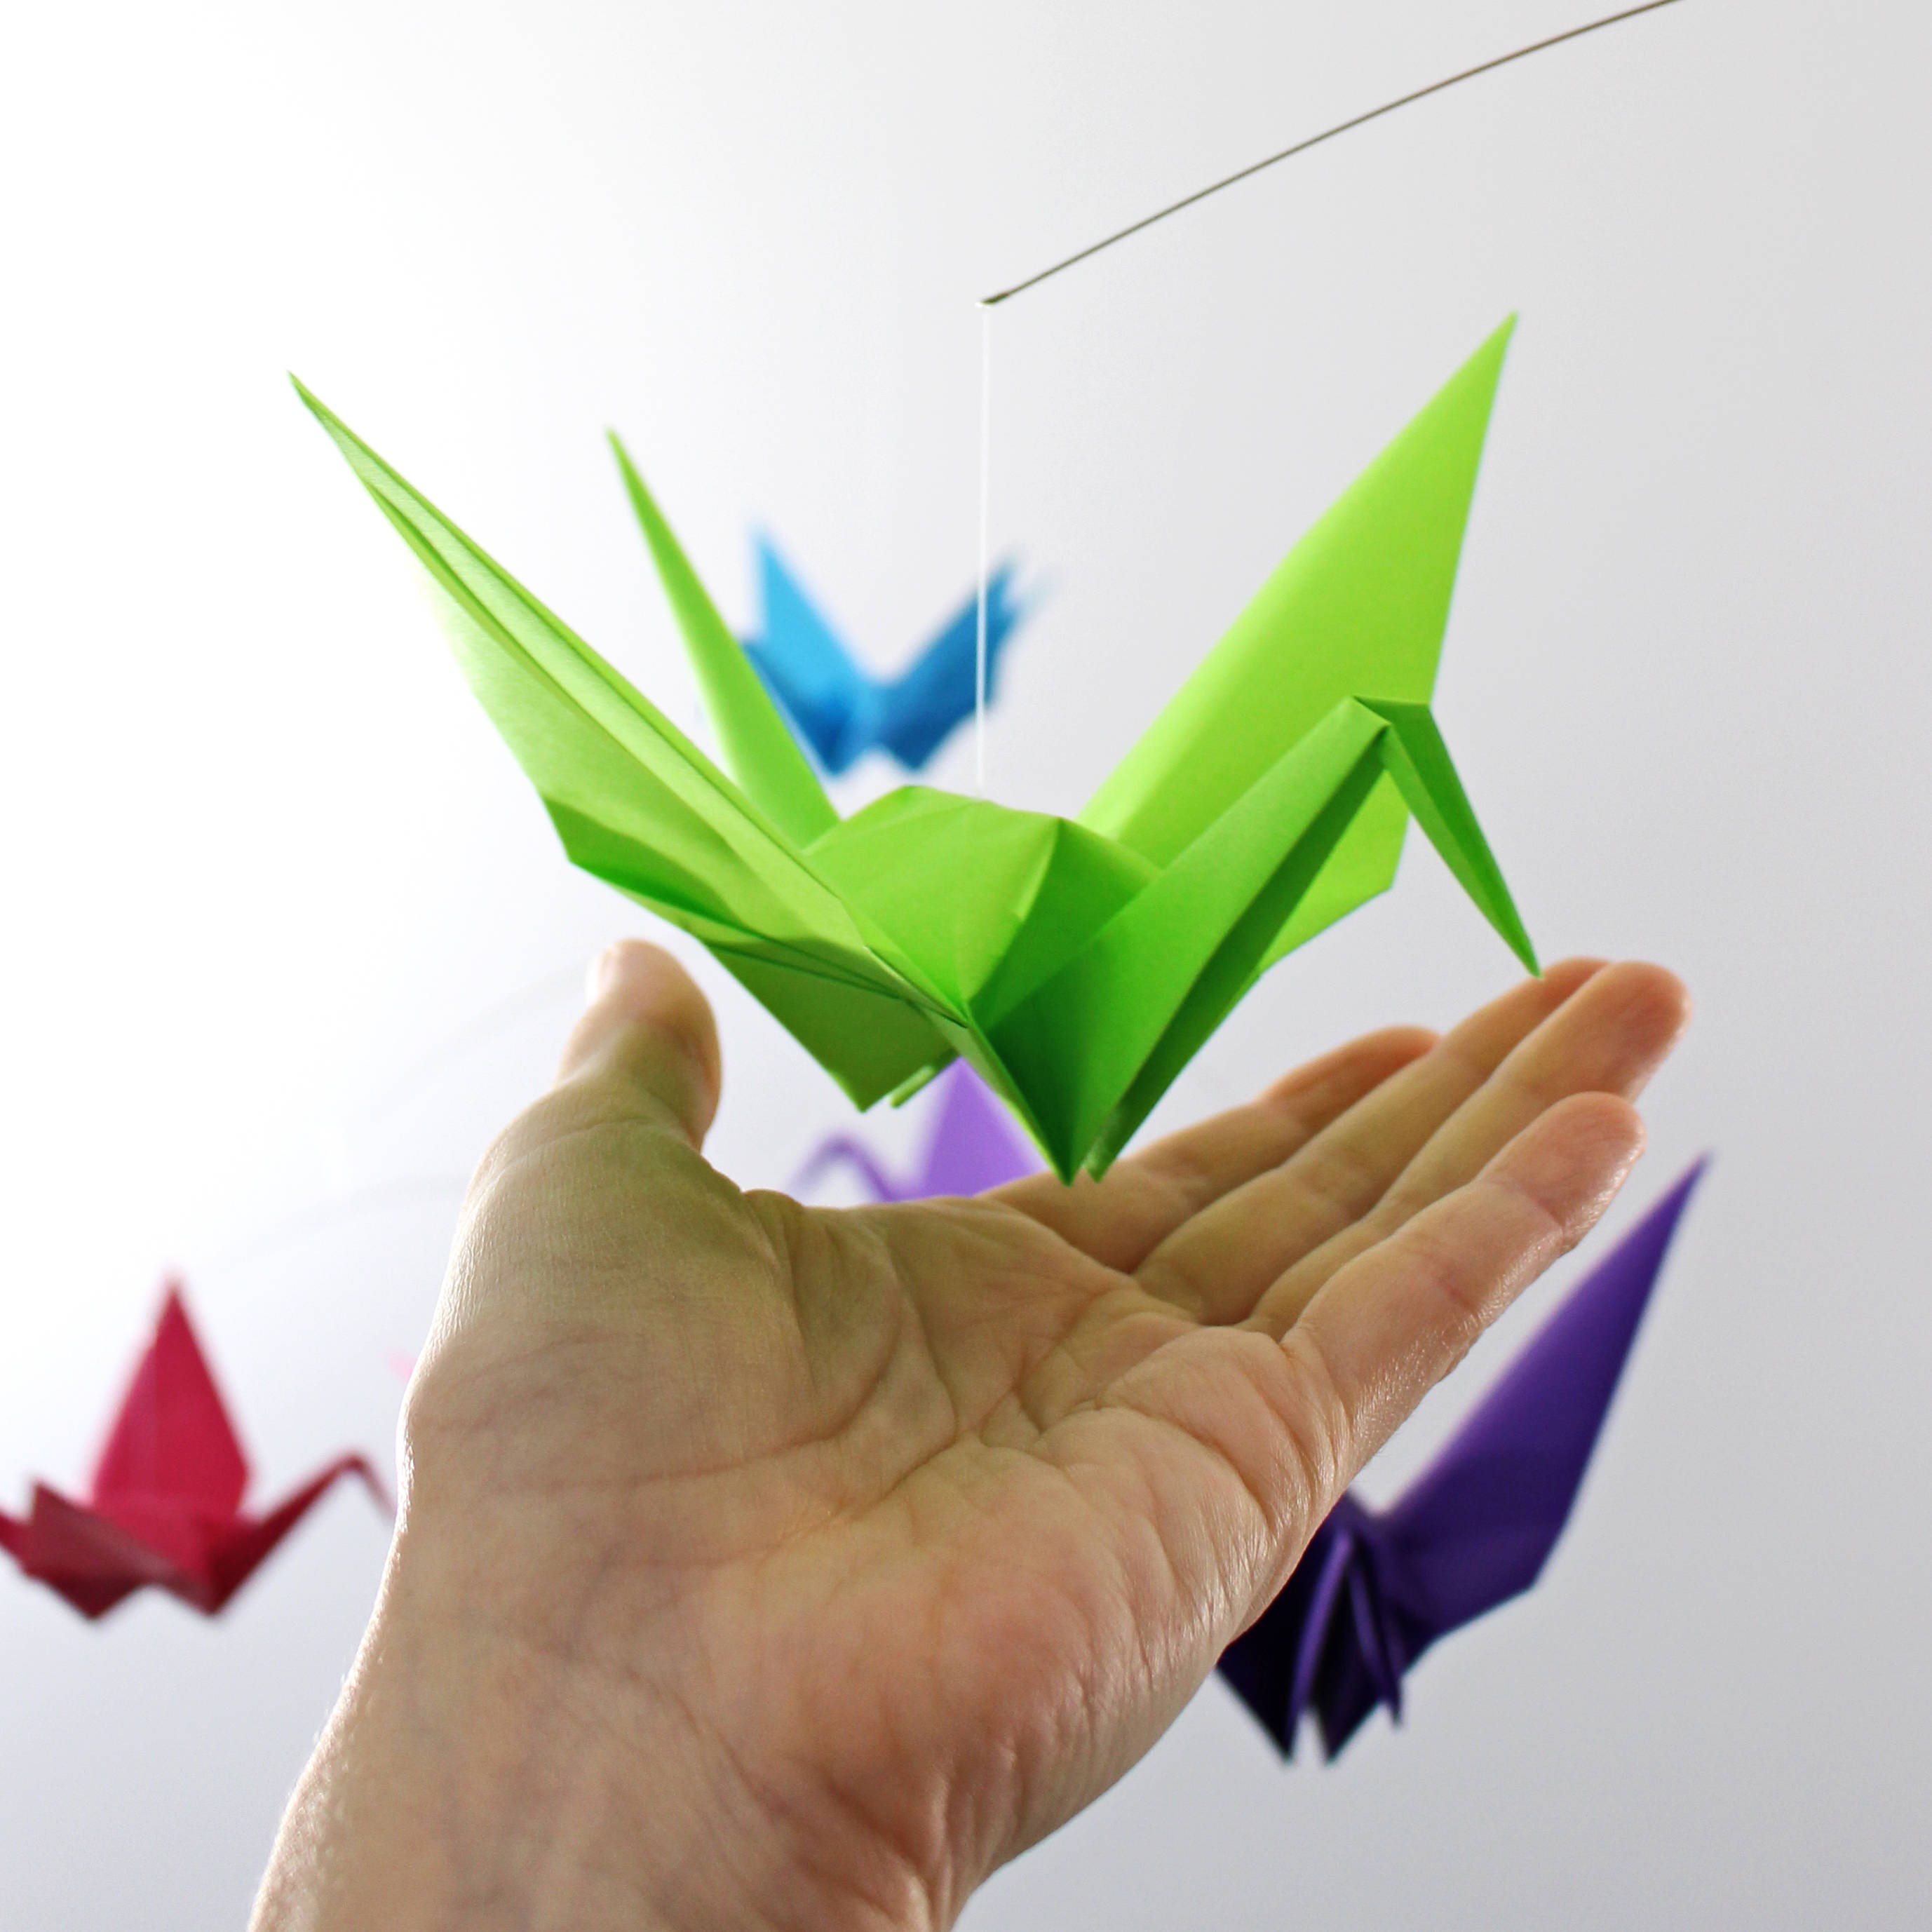 Rainbow Origami Crane Hanging Mobile Set of 6 Hand Folded Pastel Colored  Paper Cranes With Glass Pearl Bead Accents, PI014 